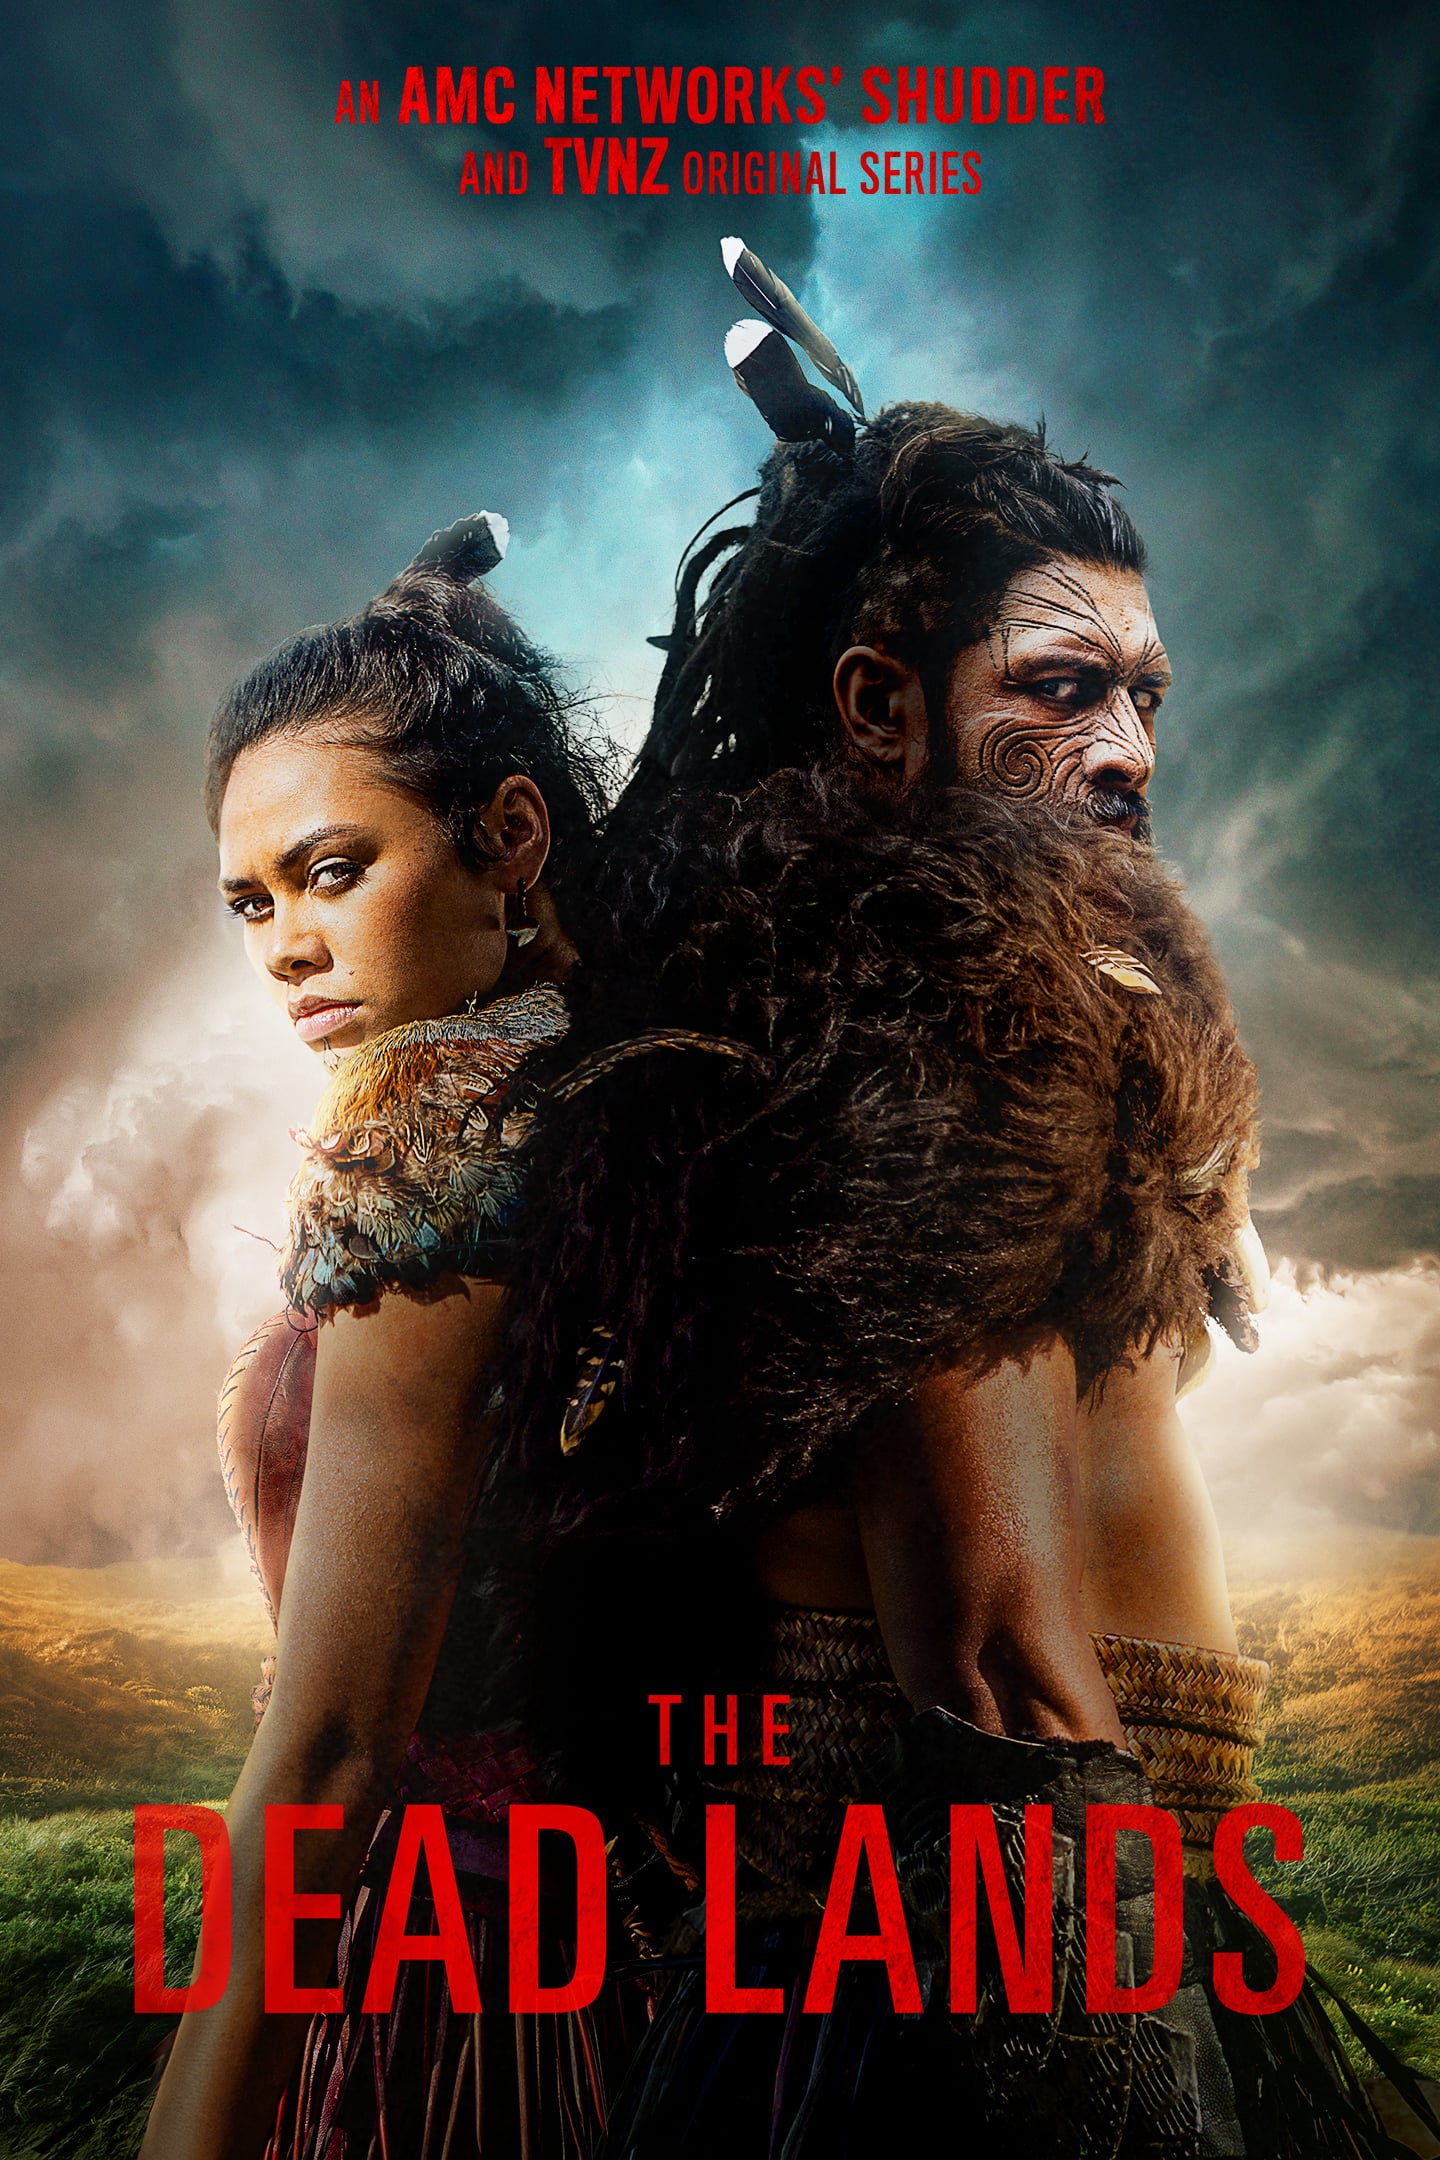 The Dead Lands rating